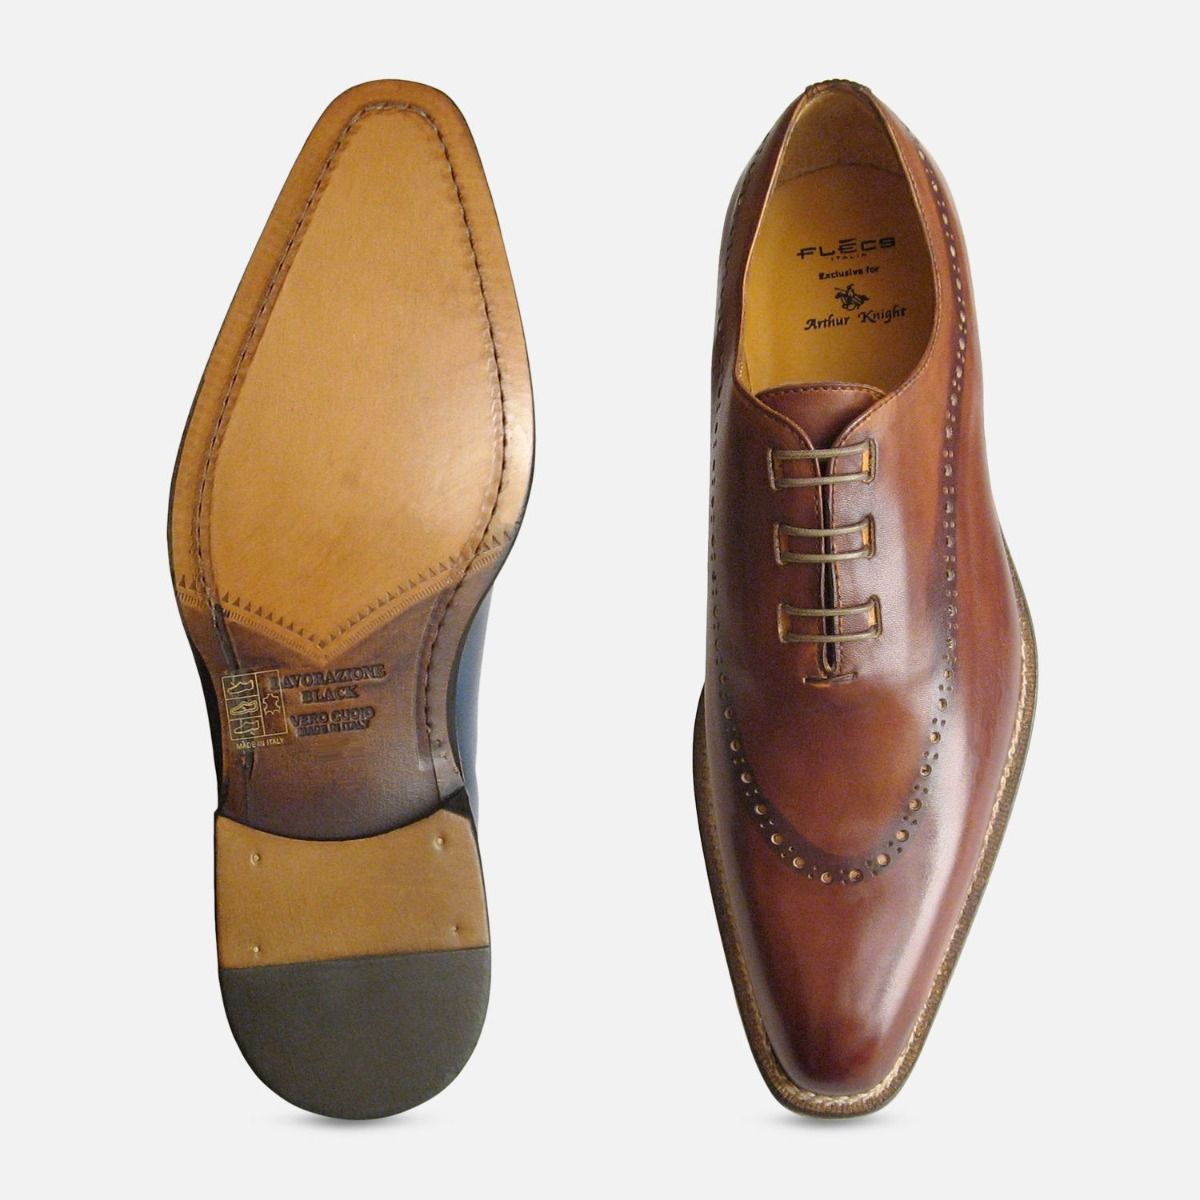 Hand Made Whole Cut Designer Brown Mens Shoes by Arthur Knight